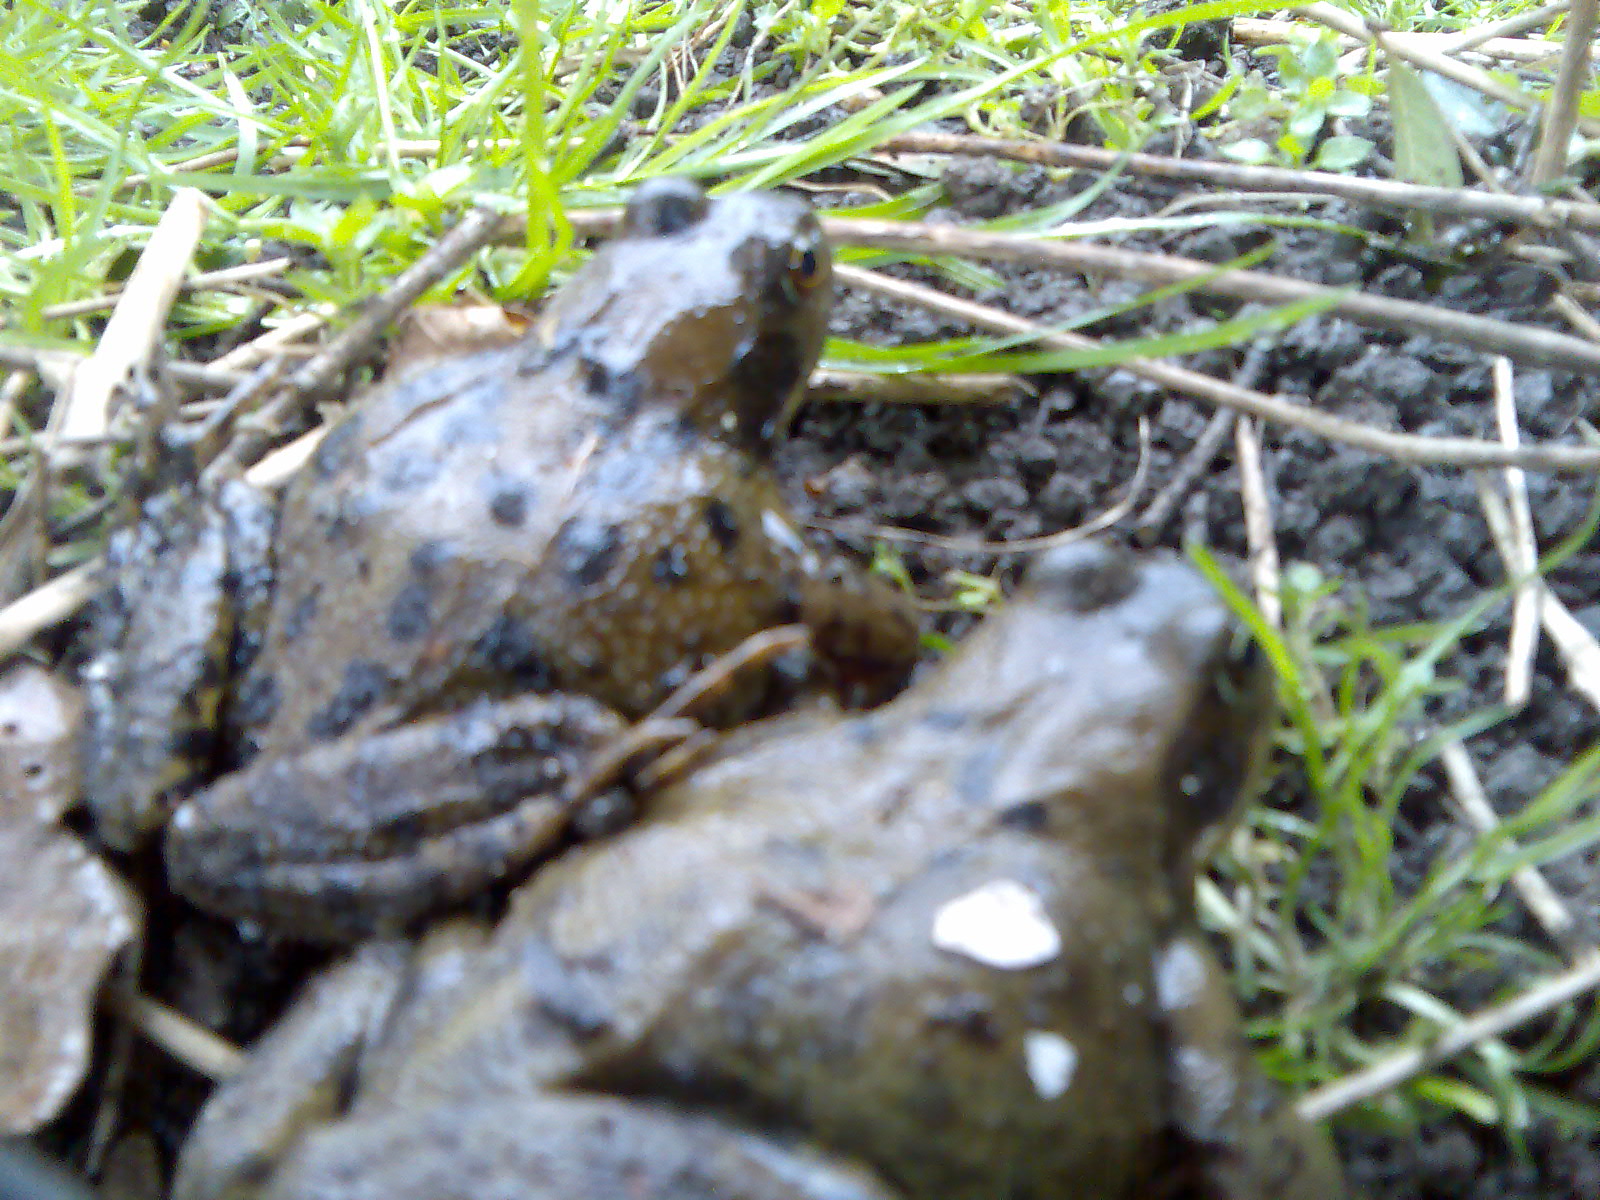 the frog is on a pile of dirt and grass